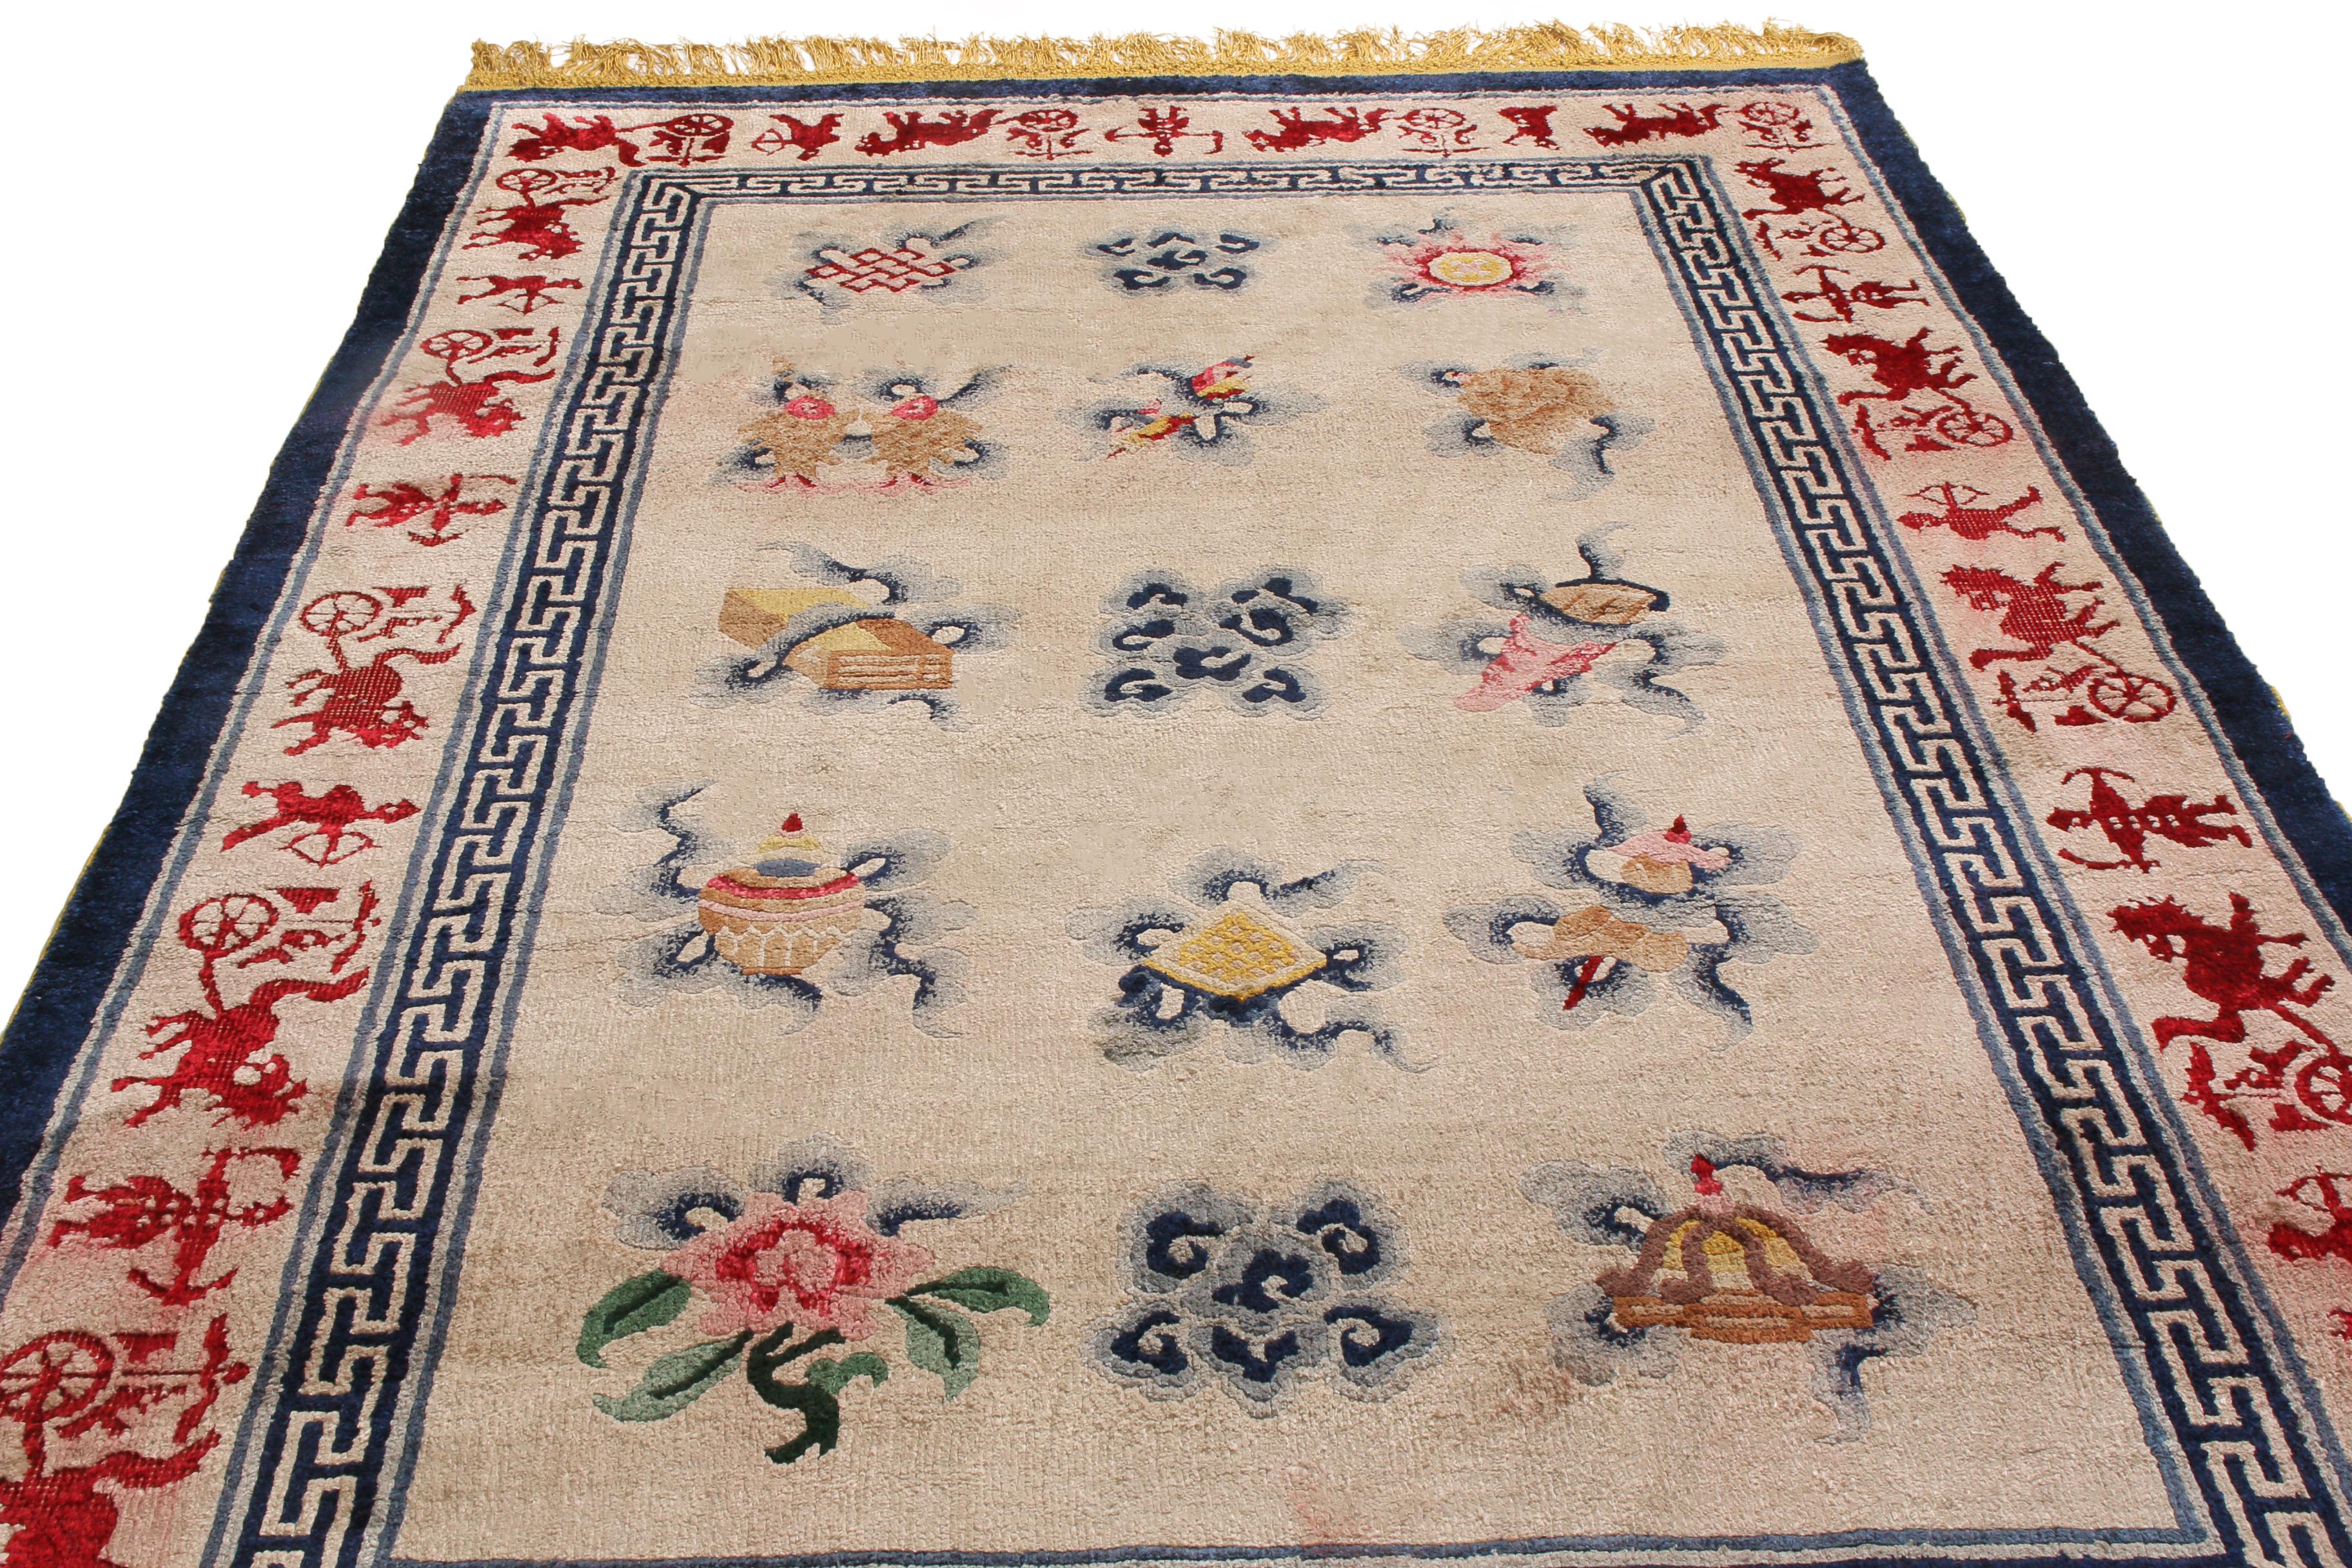 Originating from China between 1960, this antique traditional Peking rug is one of a select design featuring rich, repeated character symbols in its middle border. Hand knotted in high quality silk with subtle, luminous texture, the cream pink